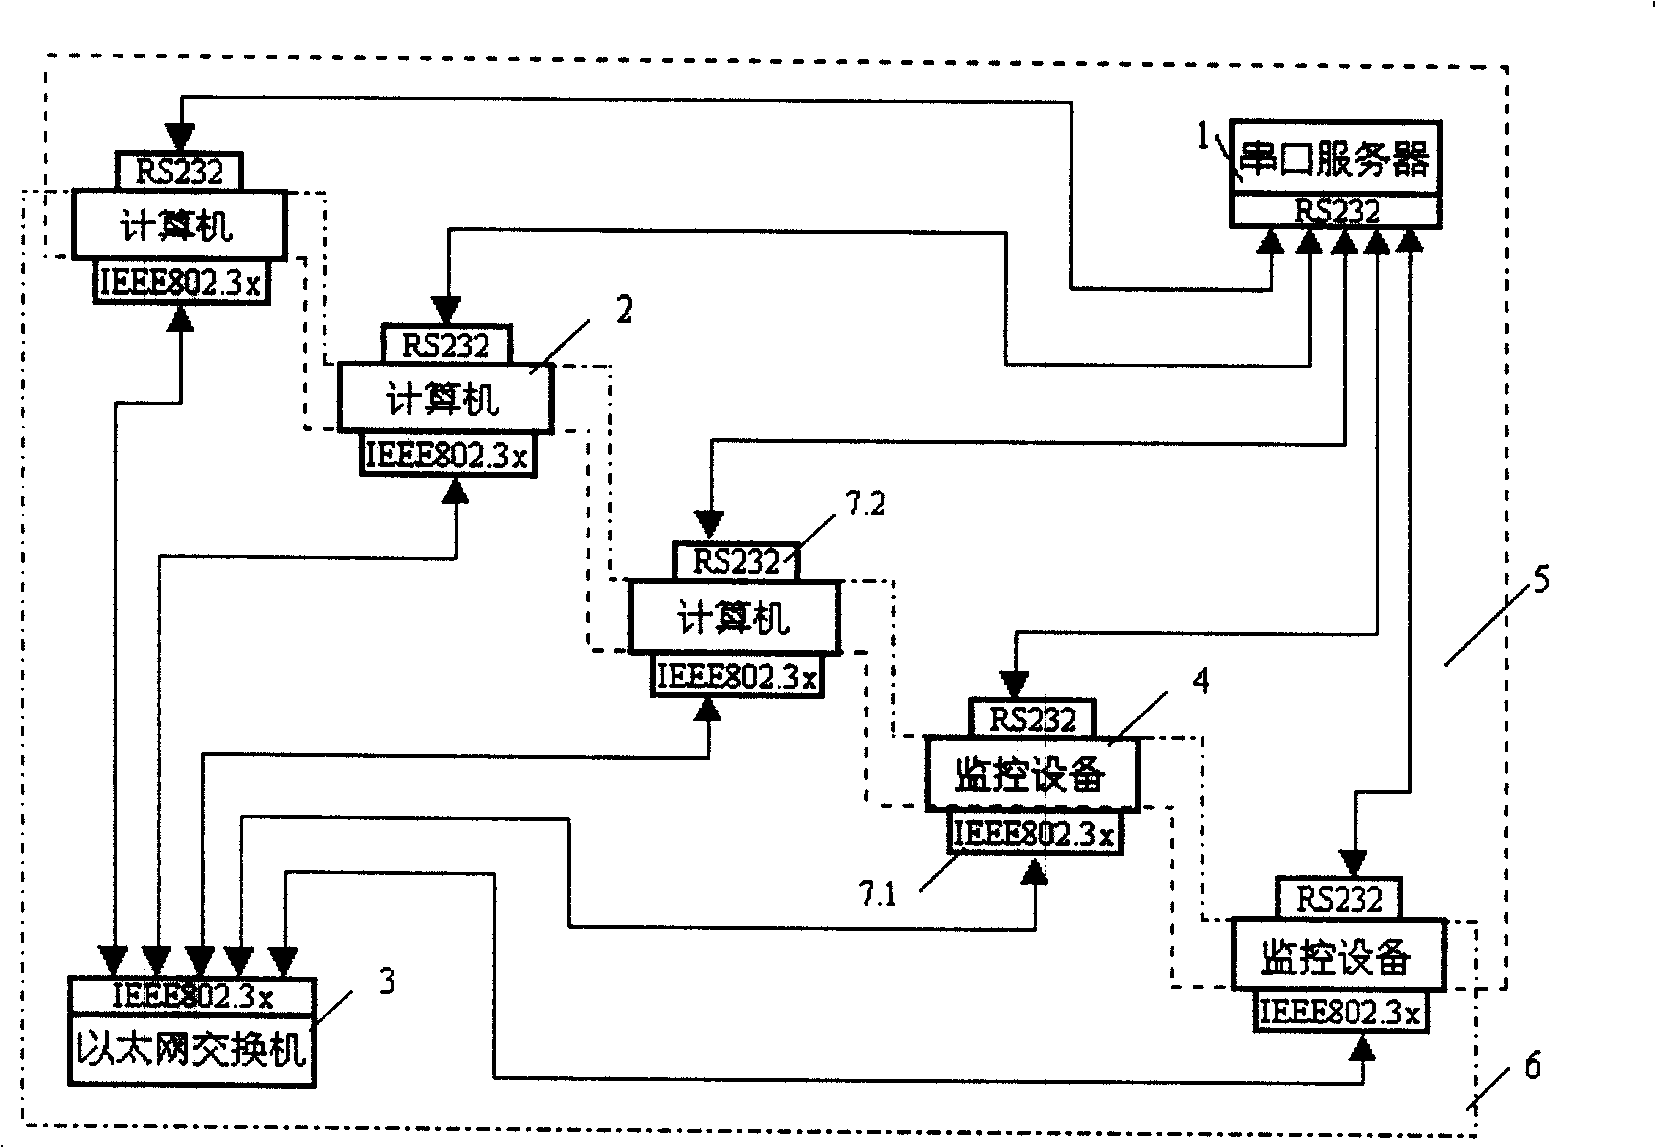 Dual independent interconnected system monitored through Ethernet